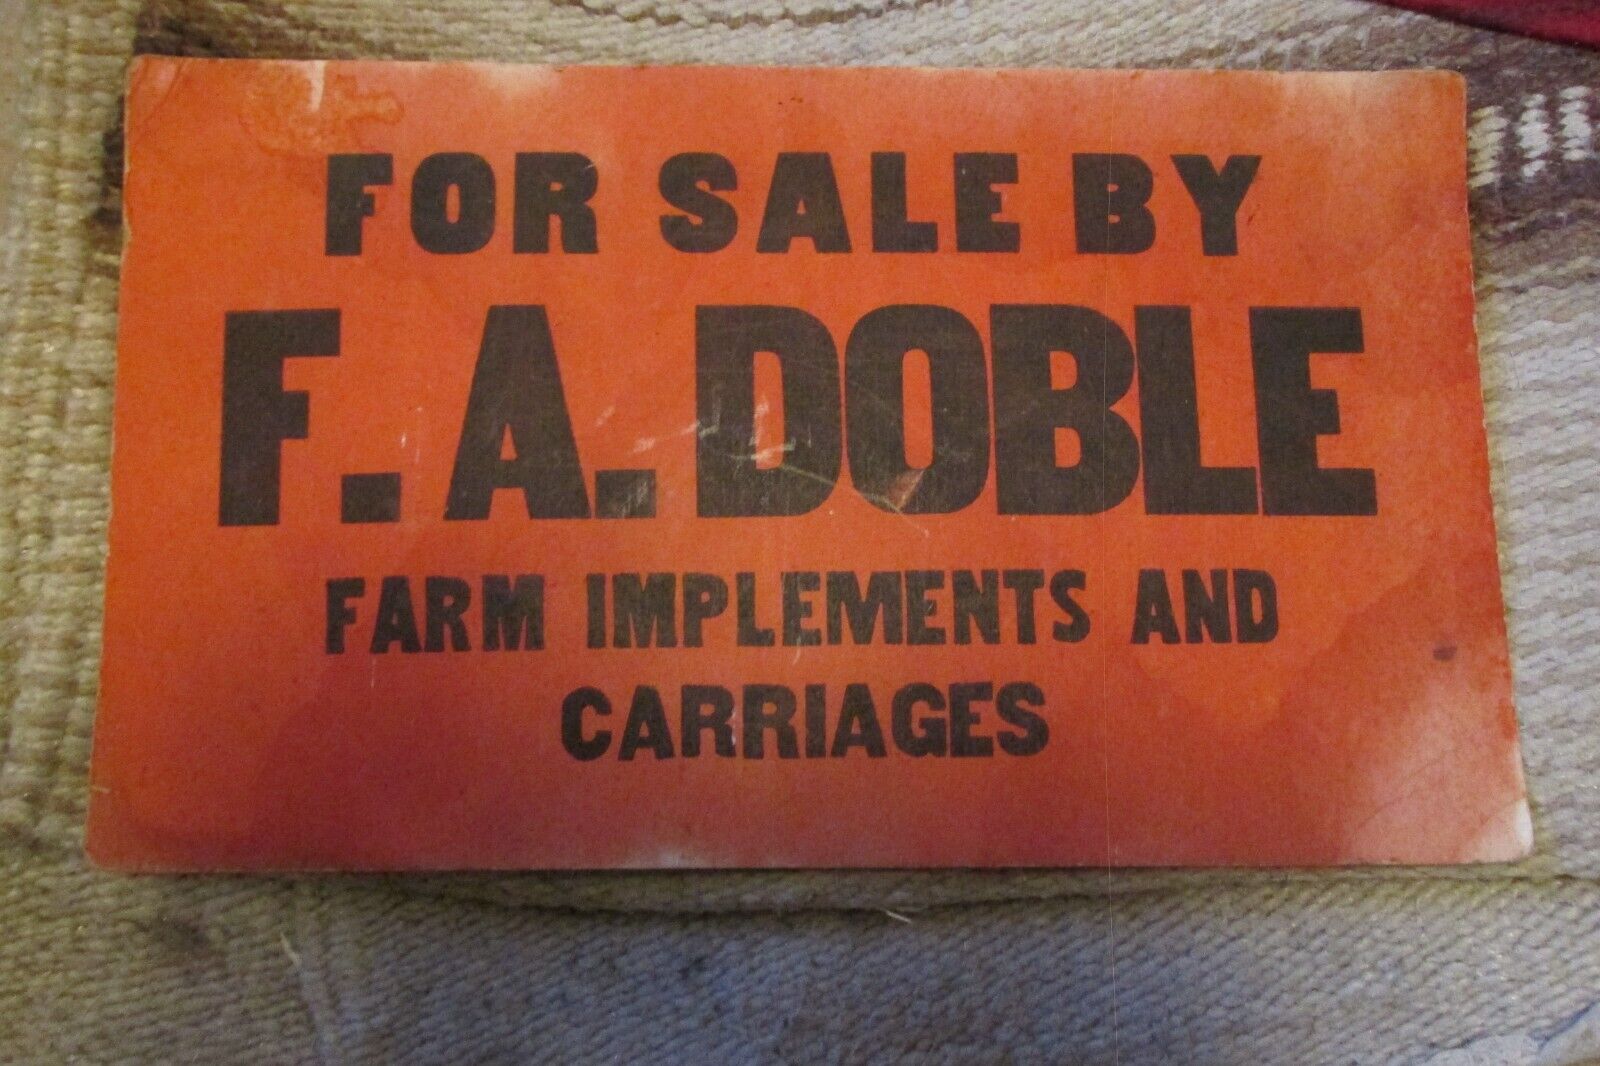 antique cardboard sign-for sale by F.A.Doble farm implements & carriages